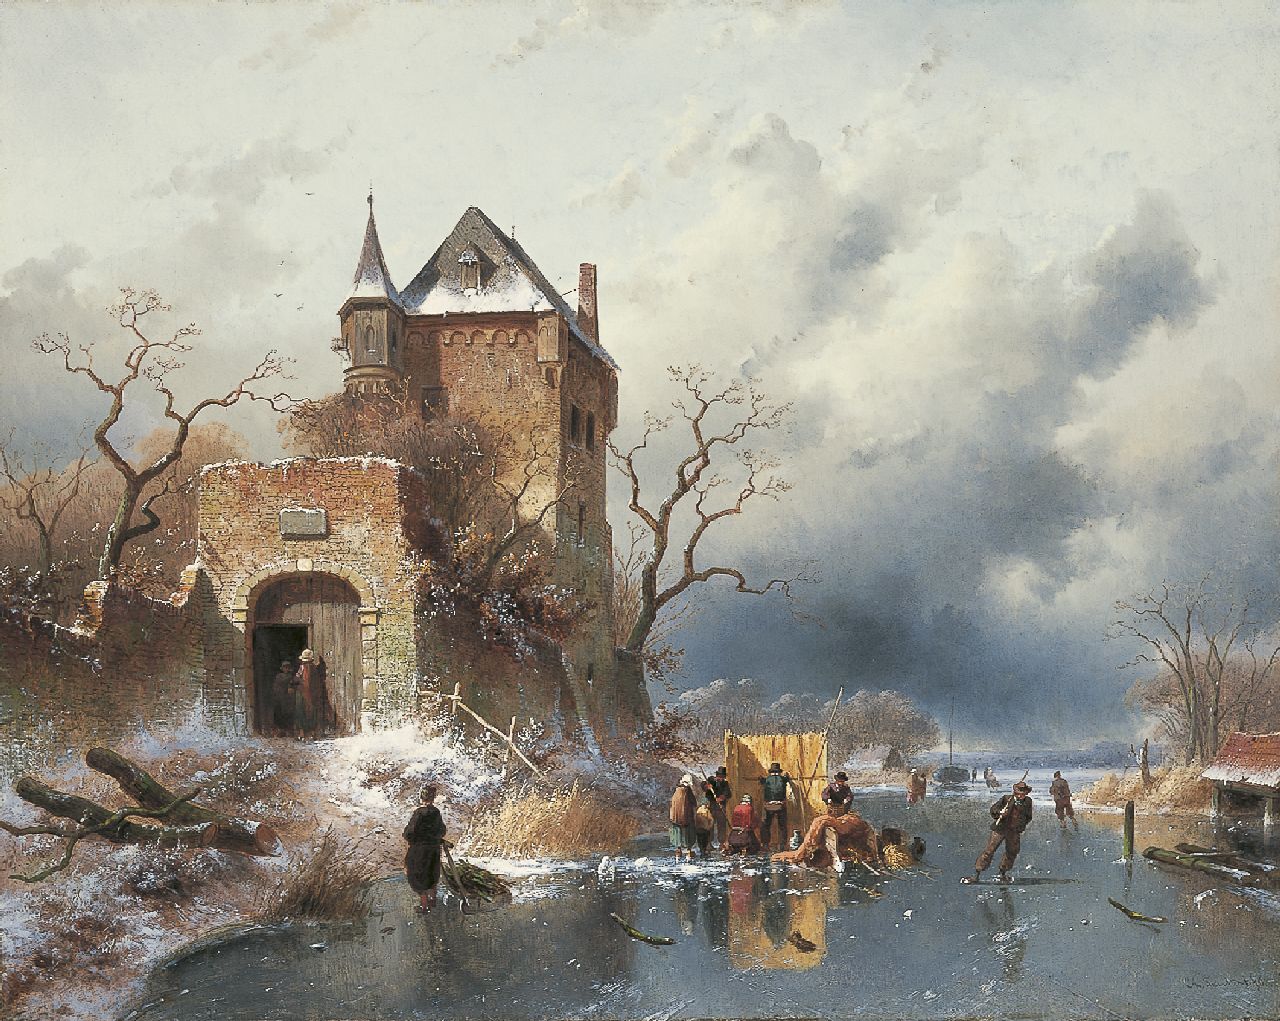 Leickert C.H.J.  | 'Charles' Henri Joseph Leickert, A winter landscape with figures on the ice, oil on canvas 58.7 x 73.3 cm, signed l.r. and dated '63